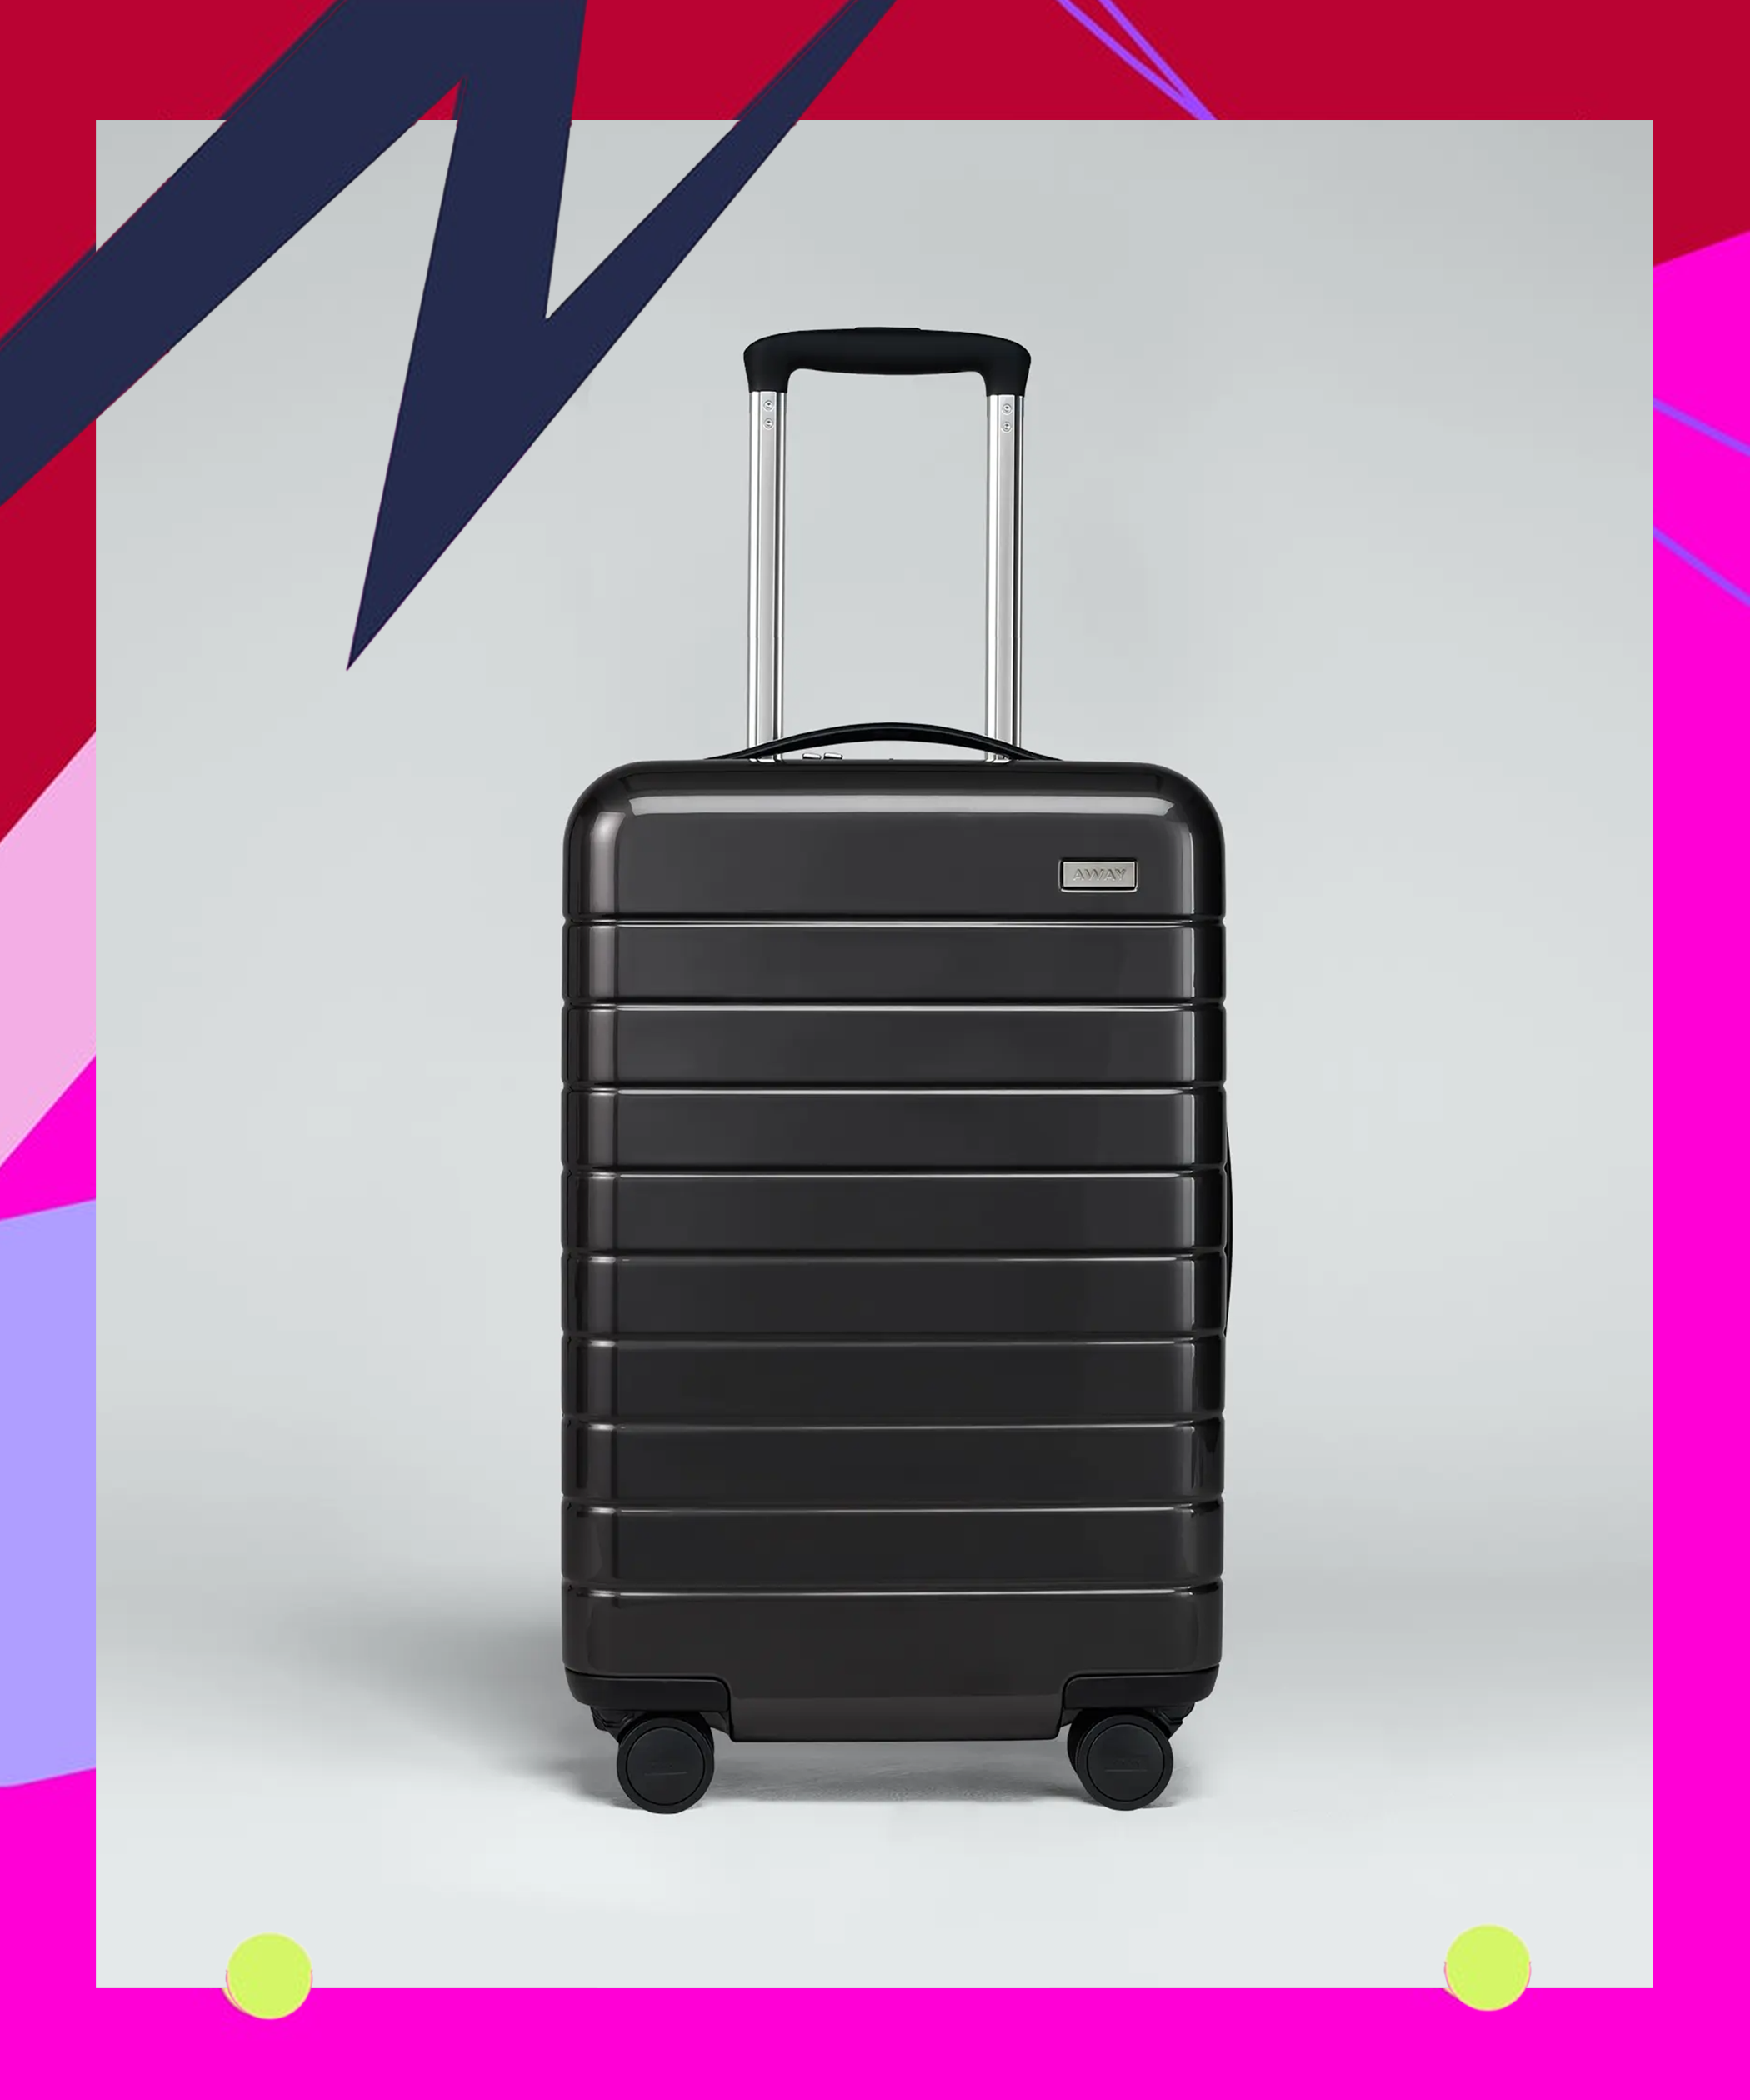 Away luggage, or suitcases for millennials